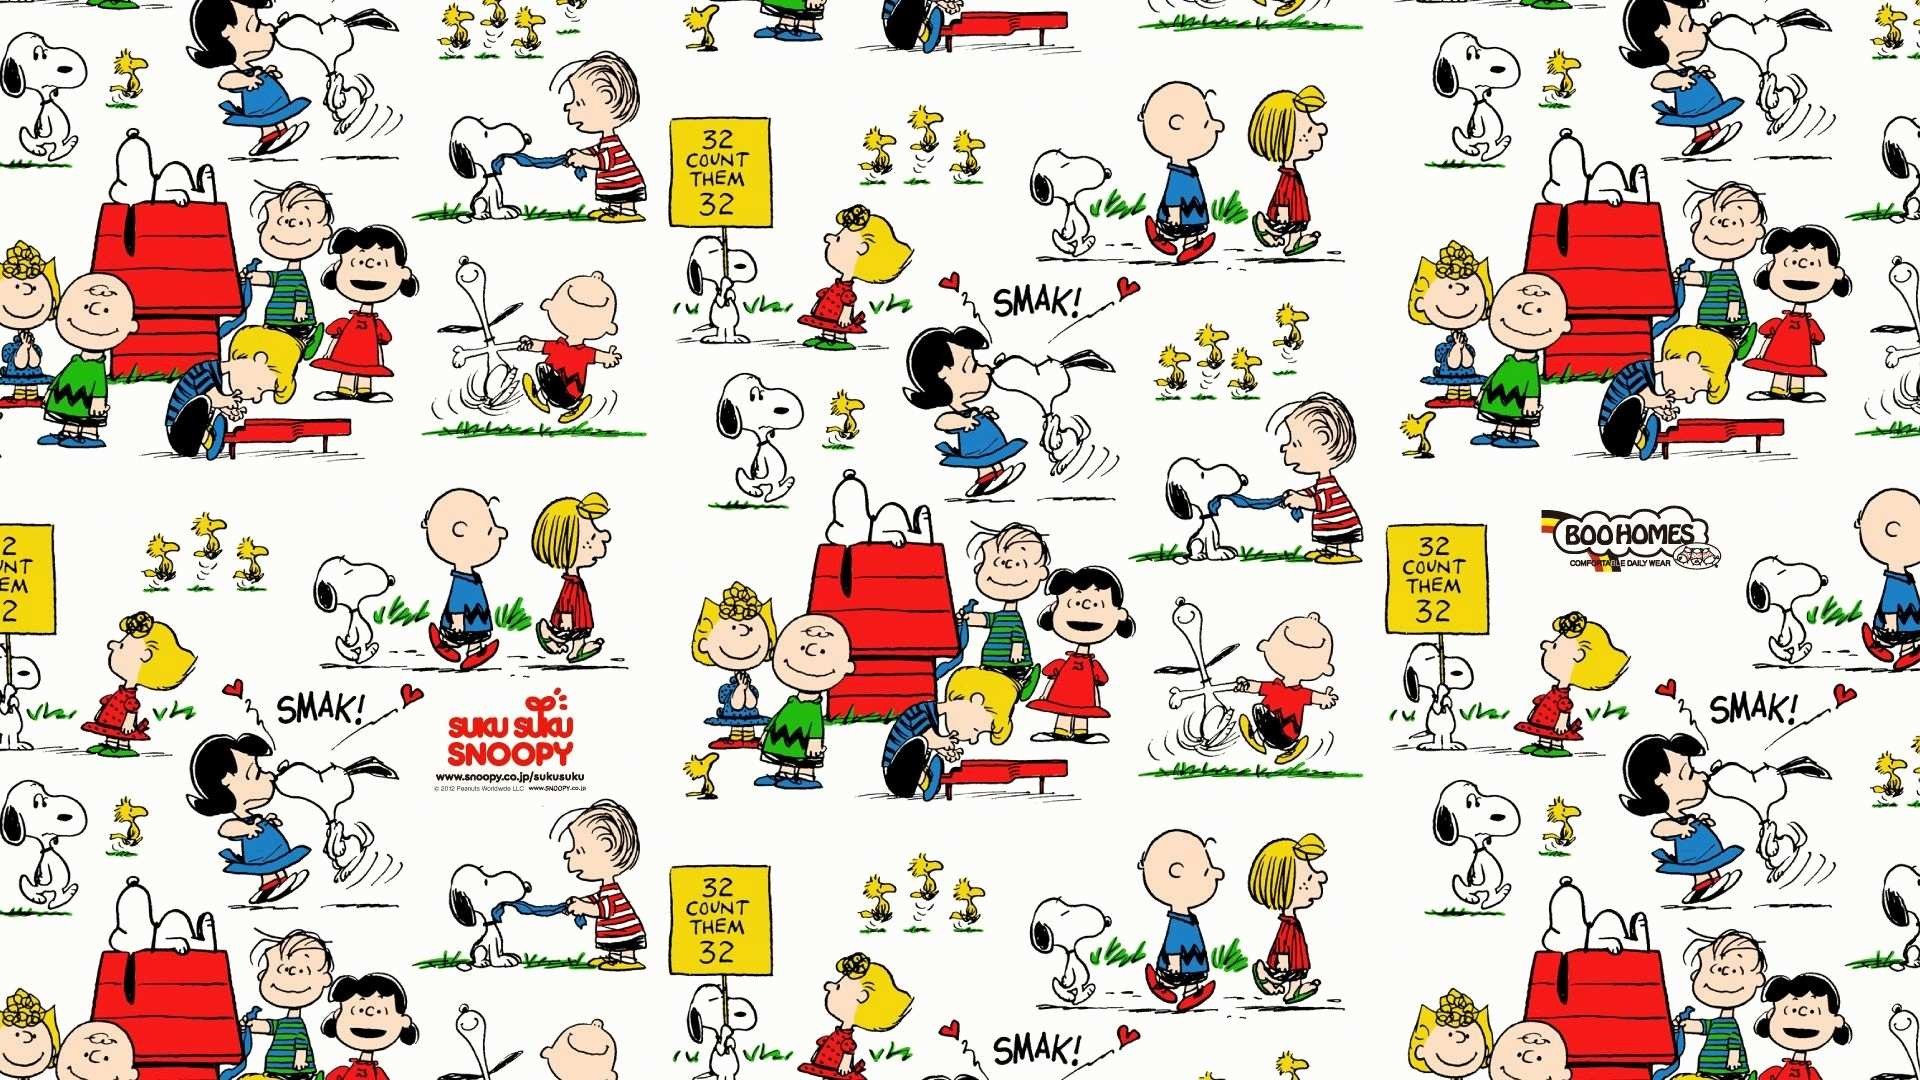 1920x1080, Peanuts Happy Birthday Images Best Of Locke - Background Snoopy - HD Wallpaper 